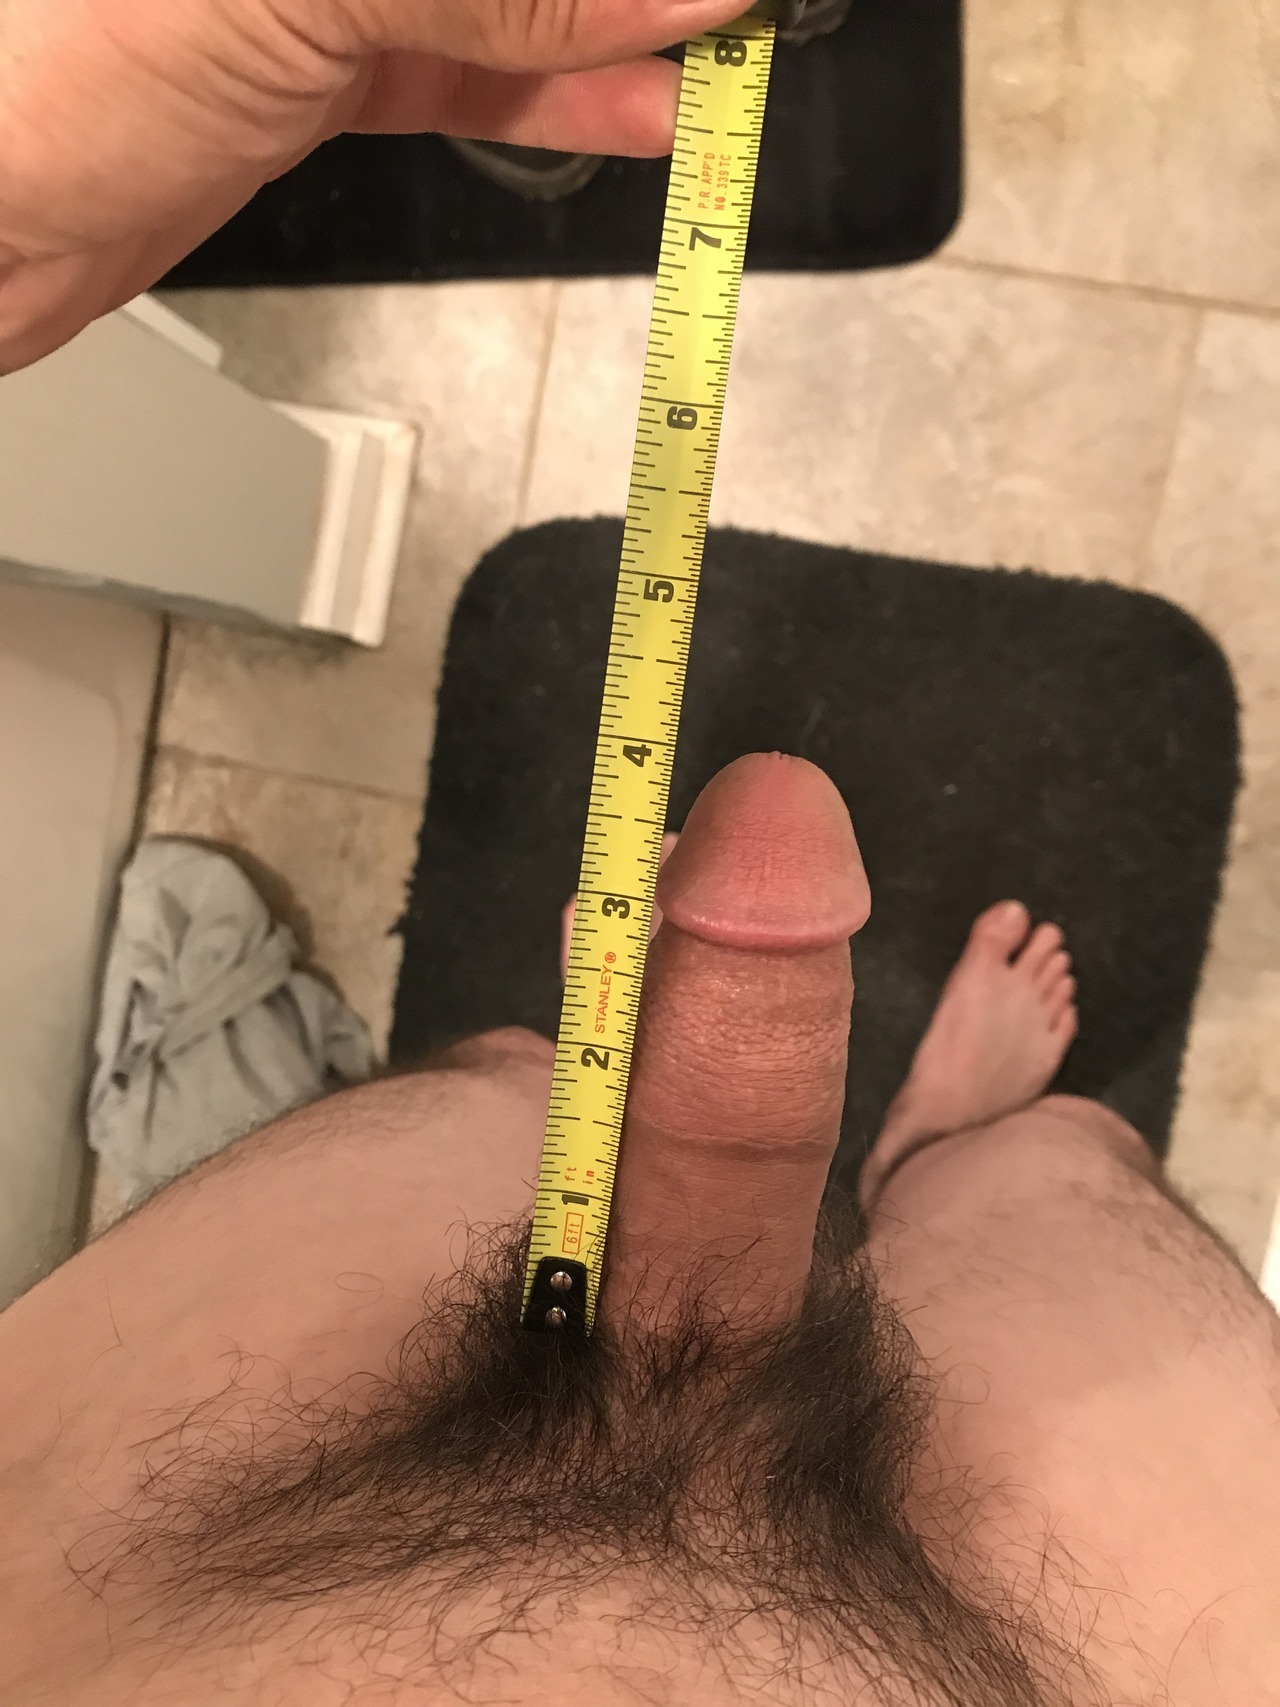 Best of Pictures of small dicks